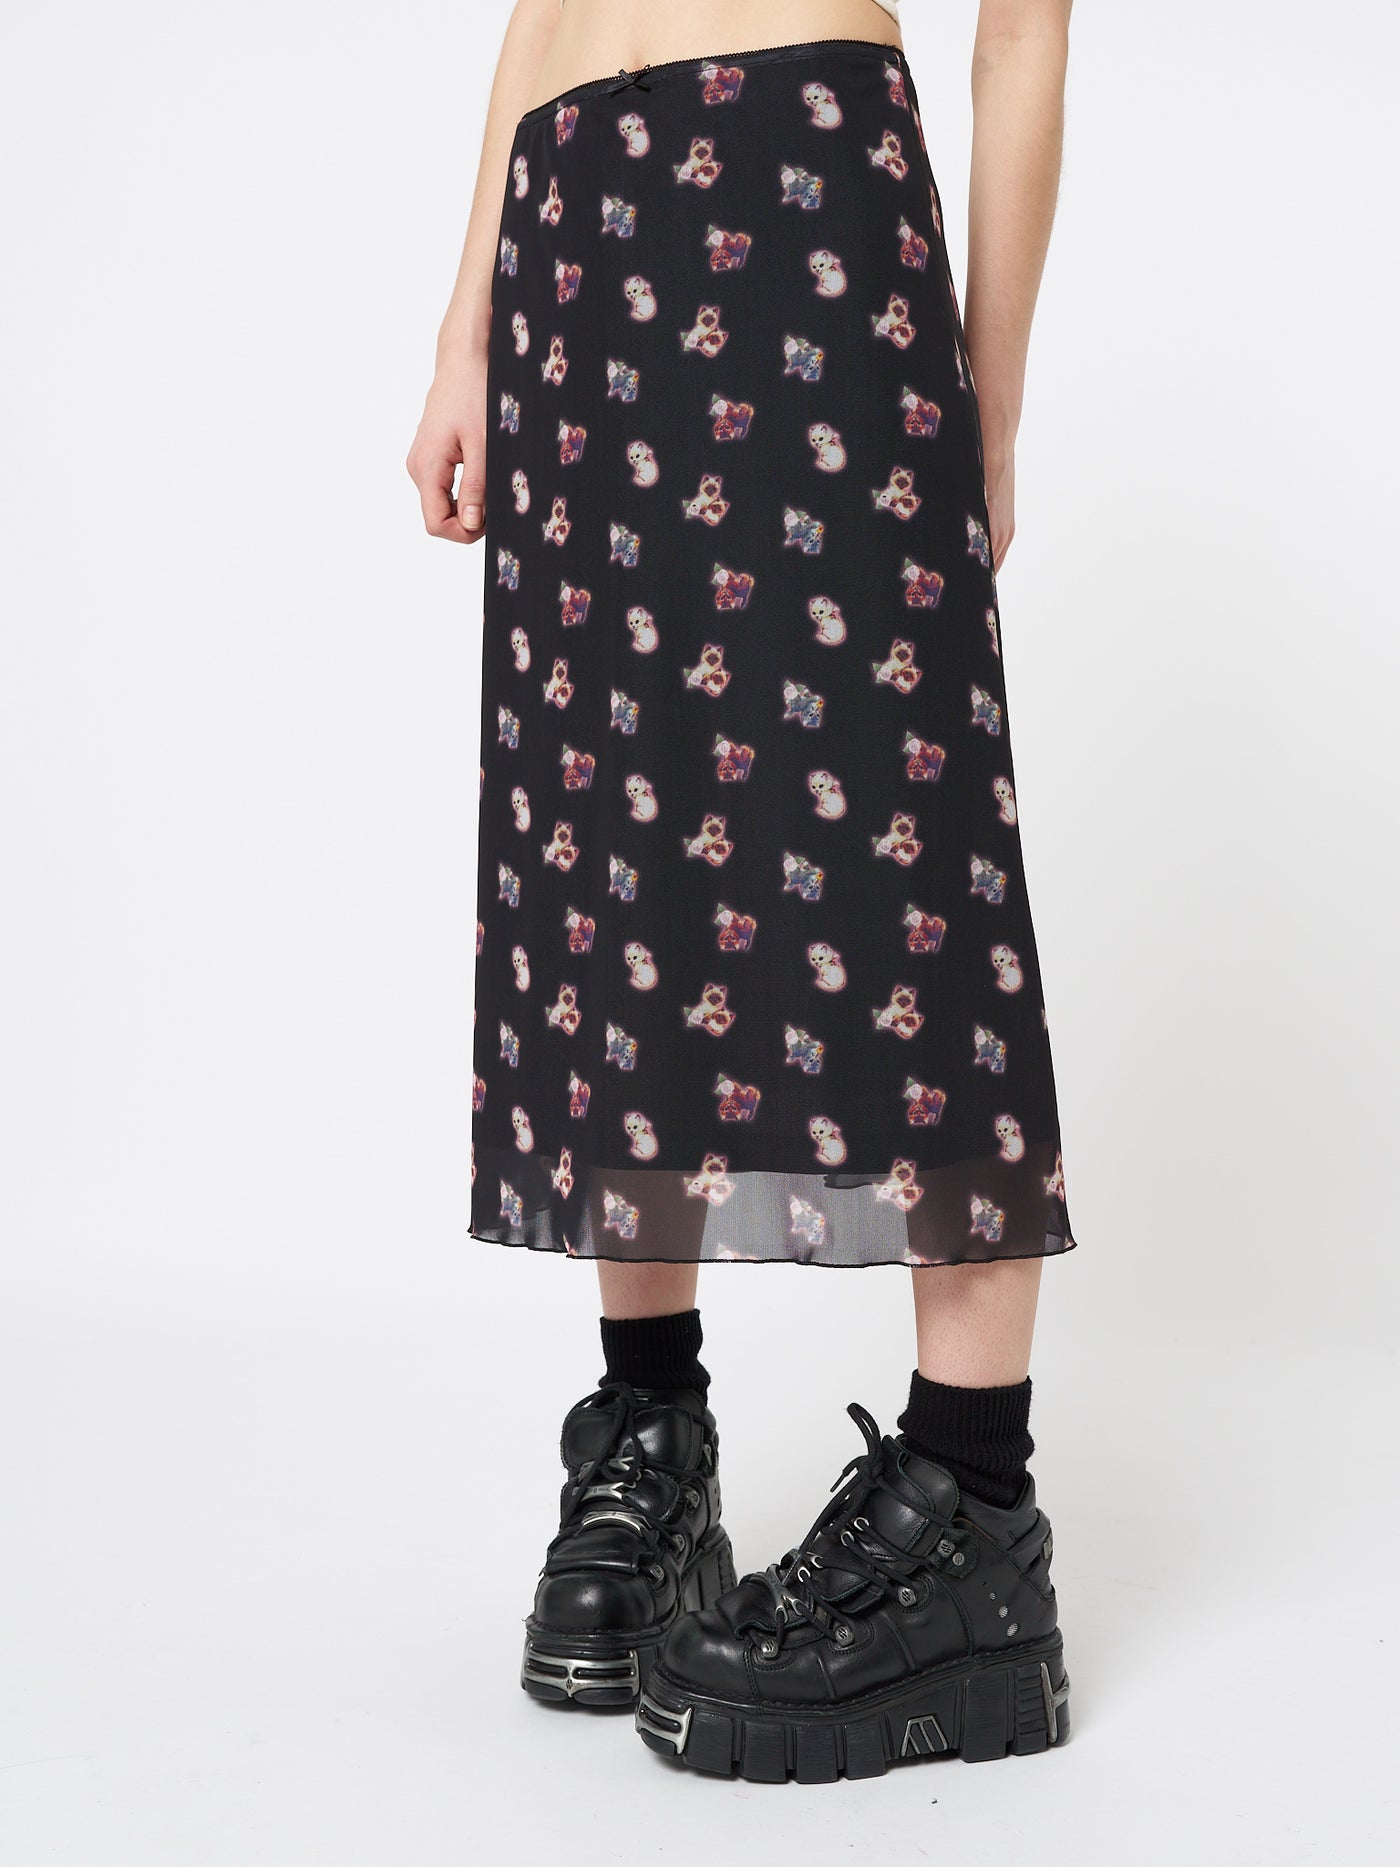 A midi mesh skirt named "That Cat Girl" by Minga London. This skirt showcases a playful and trendy design with its mesh fabric and cat-inspired motifs, adding a touch of fun and whimsy to your look.